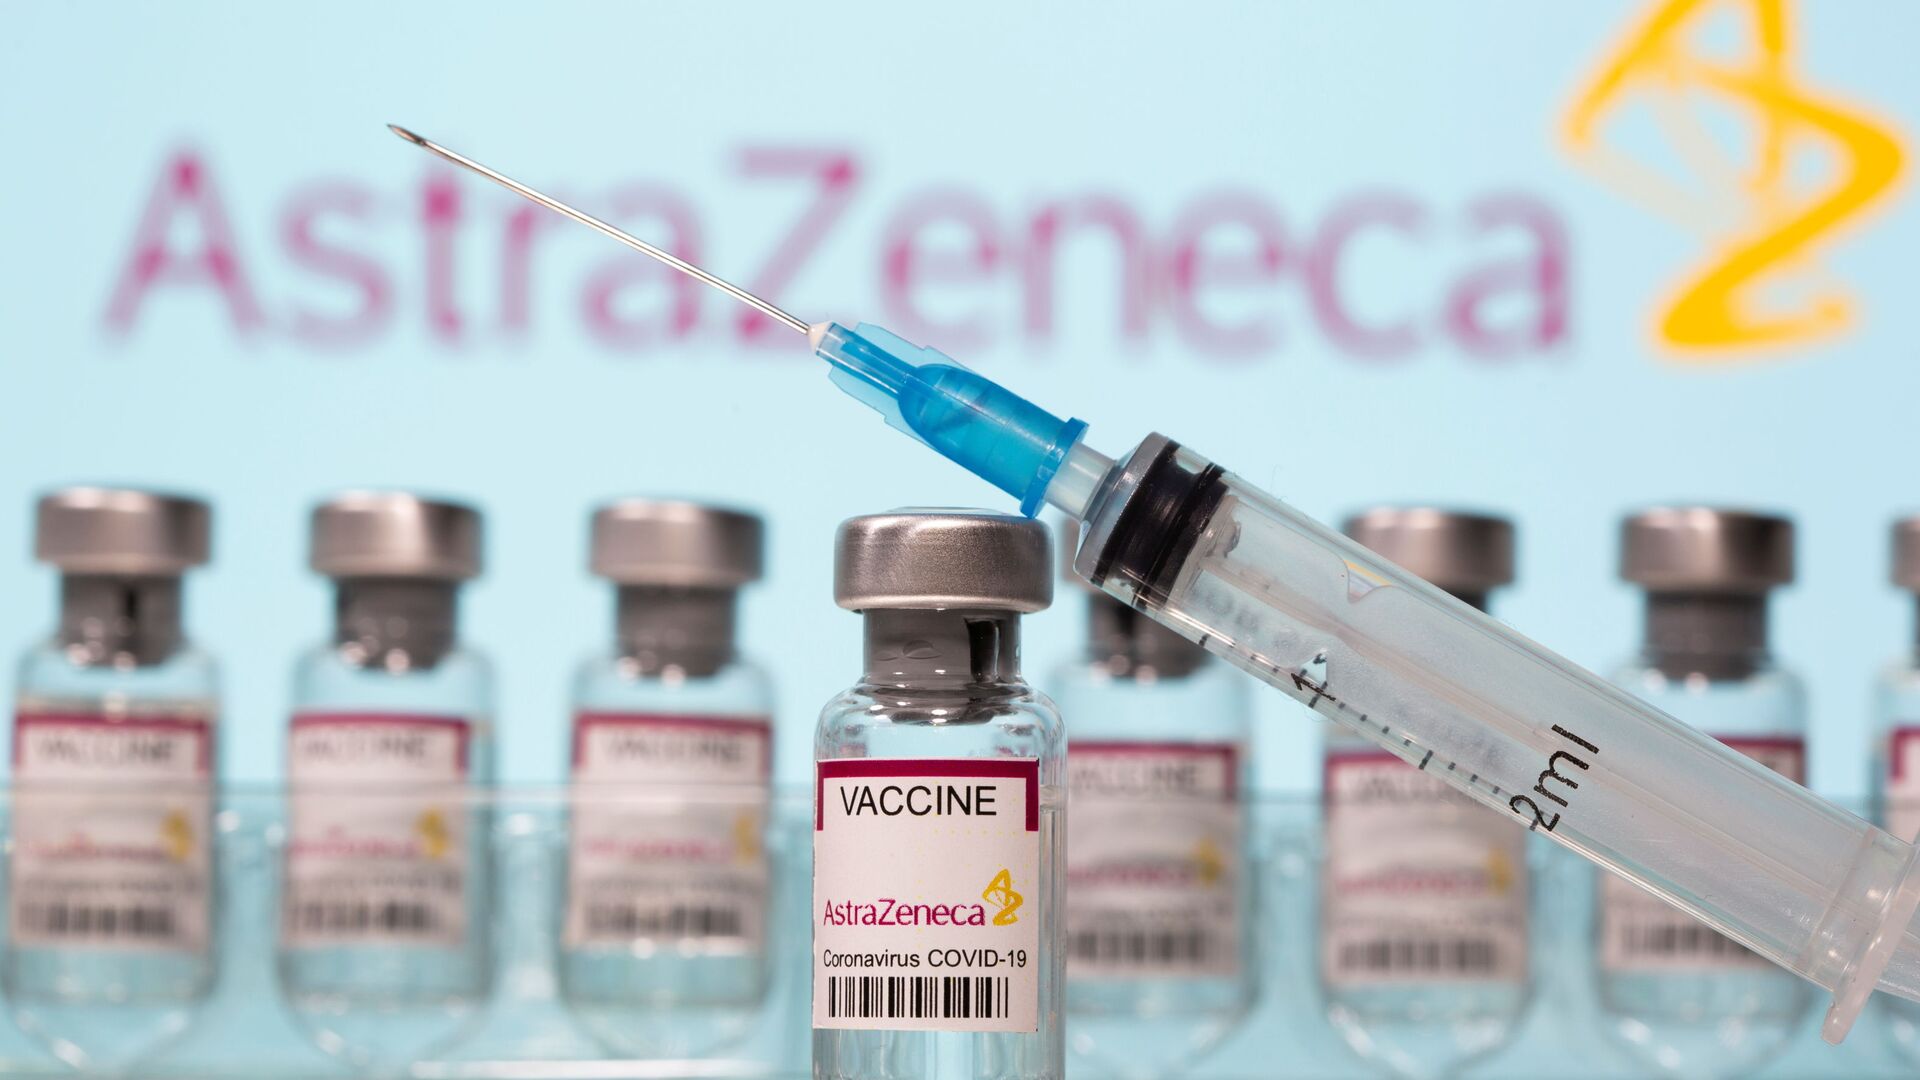 Vials labelled AstraZeneca COVID-19 Coronavirus Vaccine and a syringe are seen in front of a displayed AstraZeneca logo in this illustration taken March 10, 2021. REUTERS/Dado Ruvic/Illustration - Sputnik International, 1920, 15.03.2021